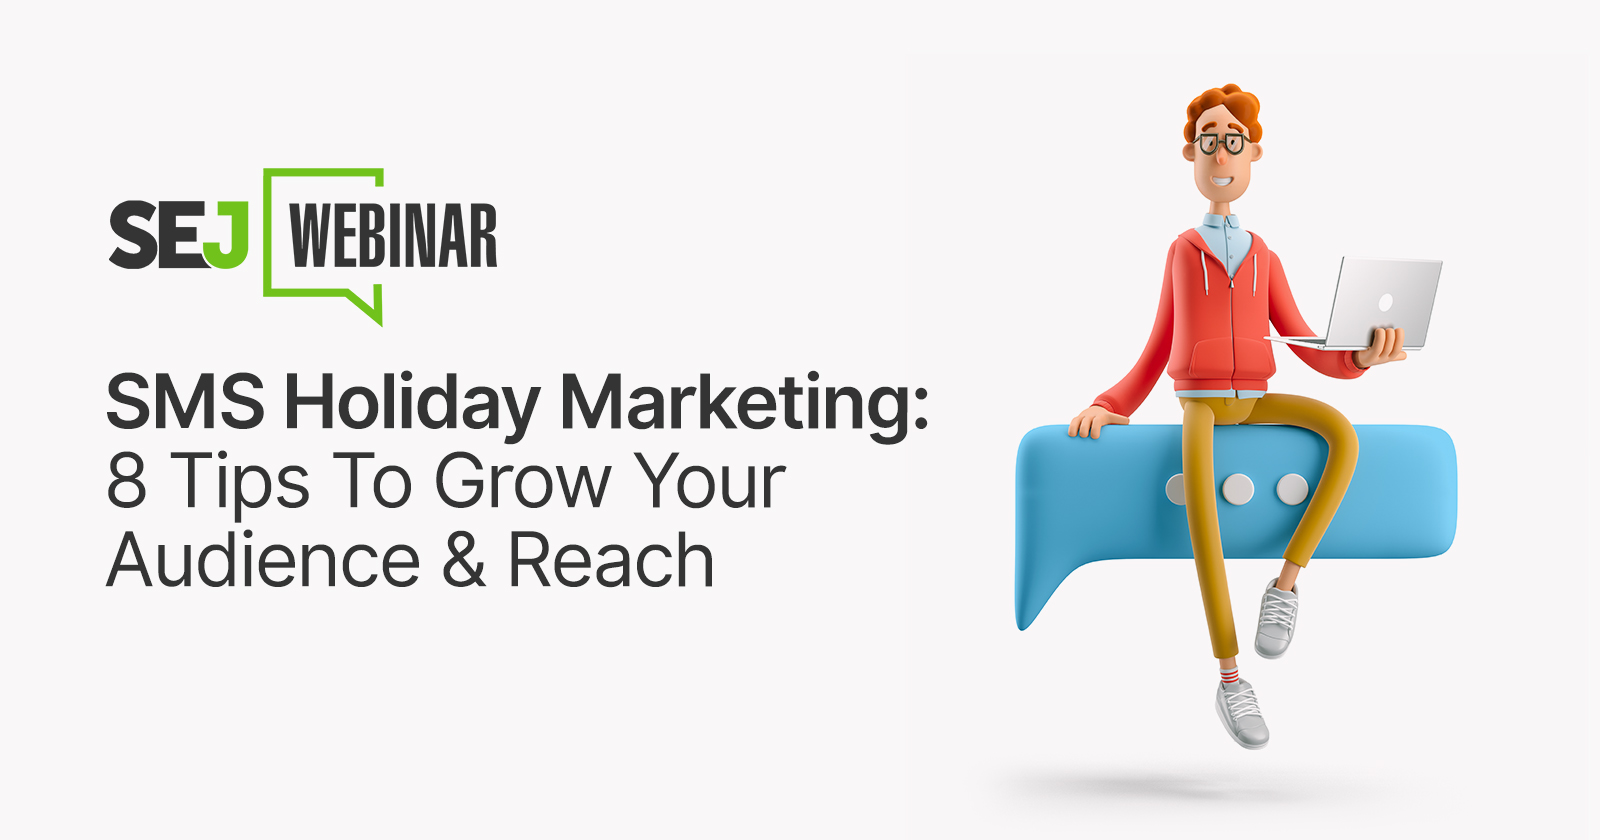 SMS Holiday Marketing: 8 Tips To Grow Your Audience & Reach via @sejournal, @hethr_campbell